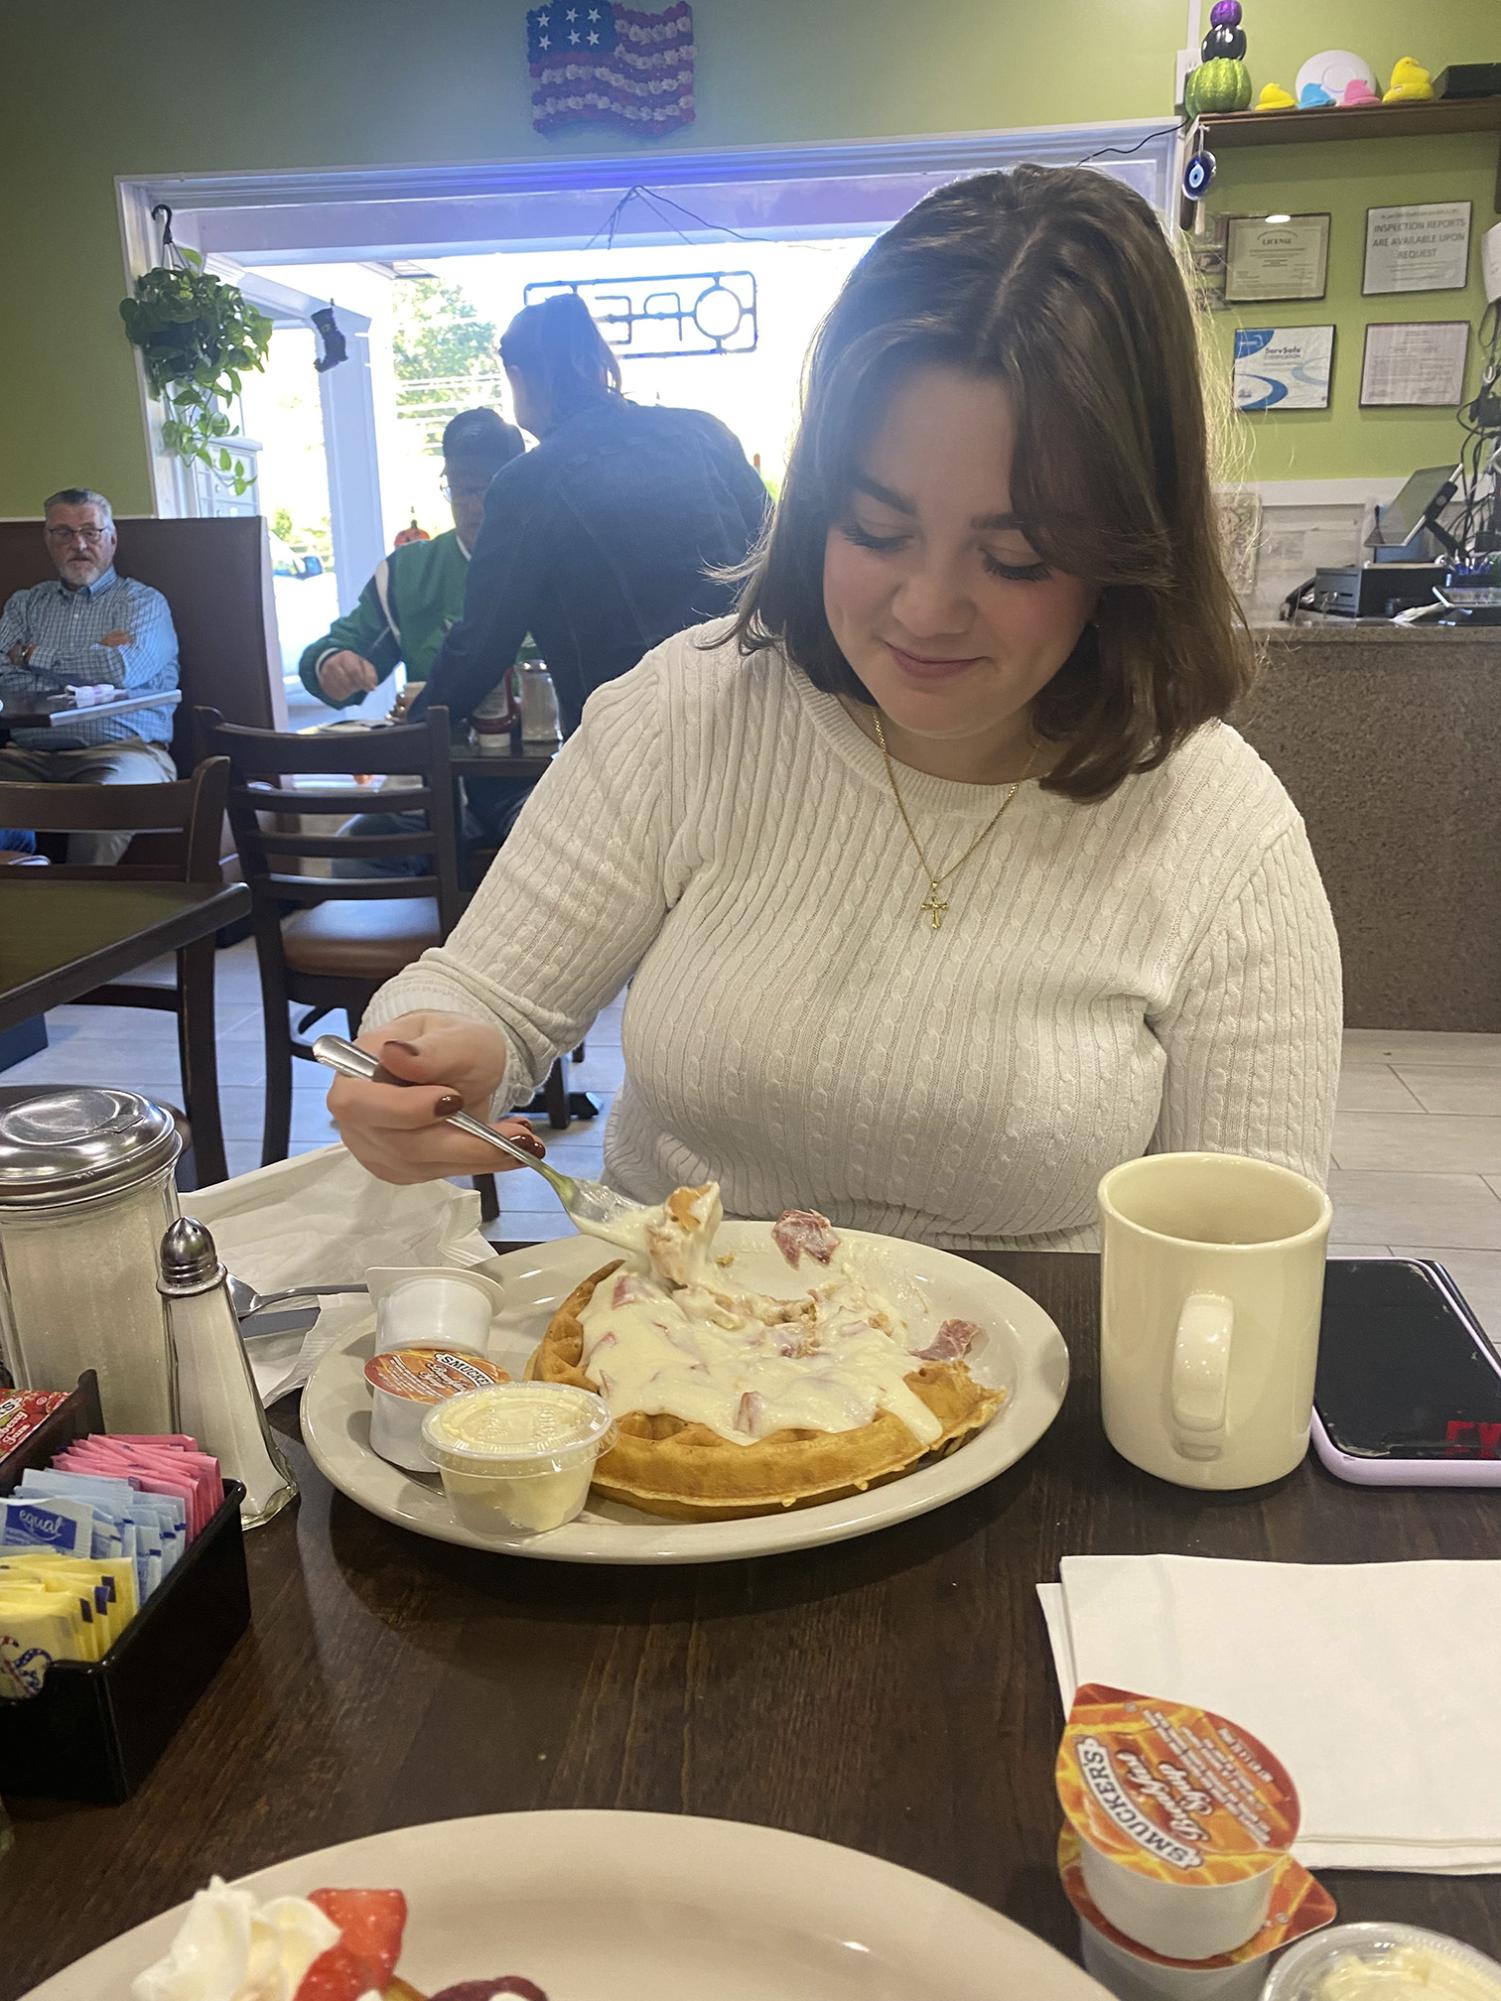 Whats up Peeps...Enjoying a waffle, junior Abby Nyce eats breakfast at Peeps Diner in Harleysville, Pa. The diner is open everyday from 6:00 a.m. to 3:00 p.m. 